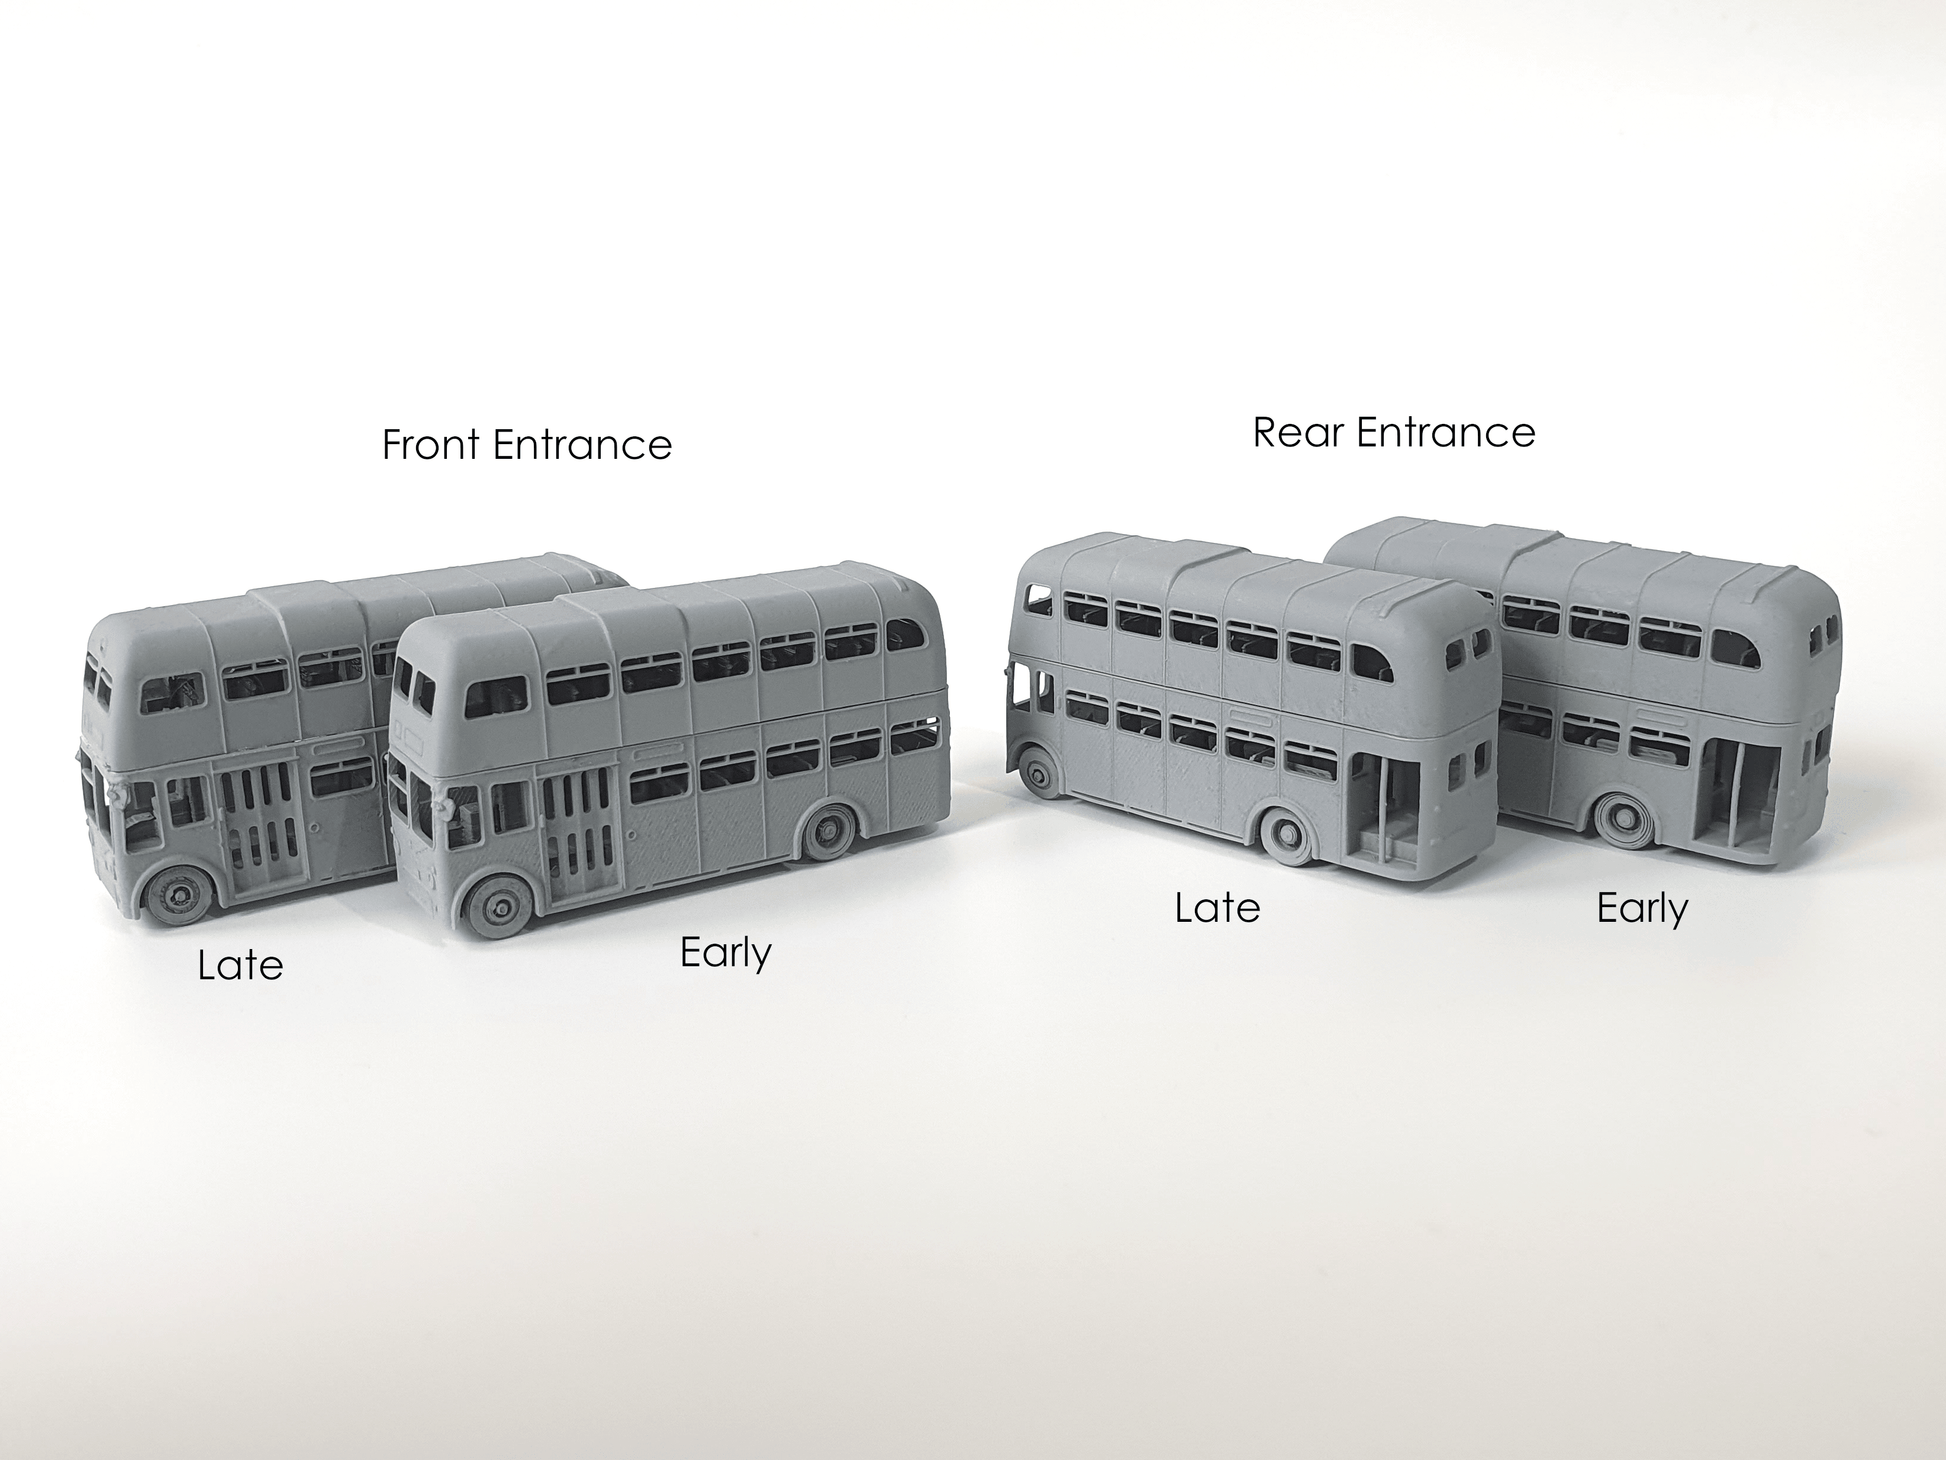 Collection of four N gauge scale model Bradford Trolleybuses, labelled with the version- Three Peaks Models